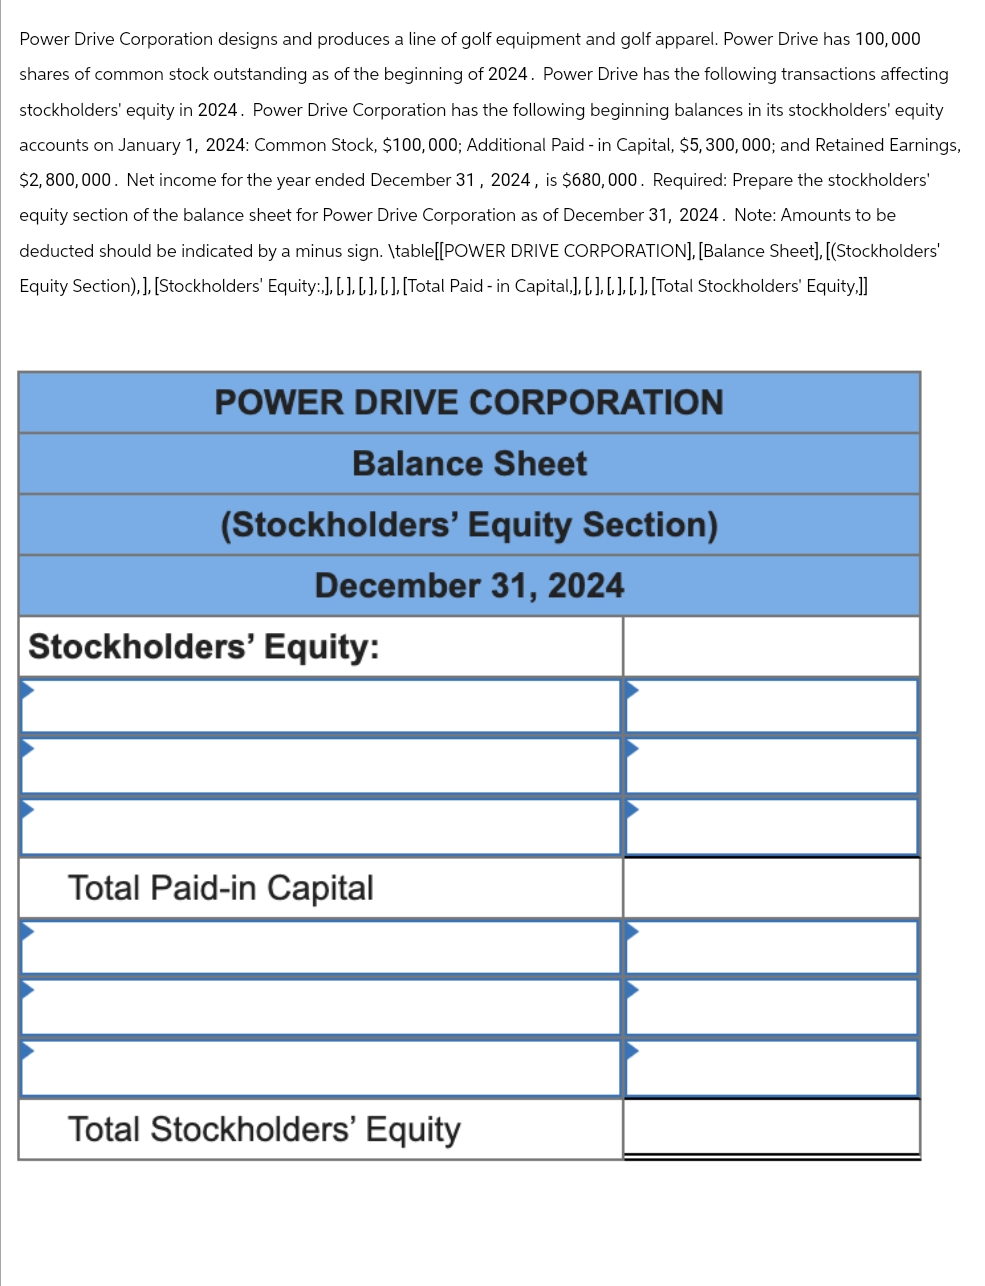 Power Drive Corporation designs and produces a line of golf equipment and golf apparel. Power Drive has 100,000
shares of common stock outstanding as of the beginning of 2024. Power Drive has the following transactions affecting
stockholders' equity in 2024. Power Drive Corporation has the following beginning balances in its stockholders' equity
accounts on January 1, 2024: Common Stock, $100,000; Additional Paid - in Capital, $5,300,000; and Retained Earnings,
$2,800,000. Net income for the year ended December 31, 2024, is $680,000. Required: Prepare the stockholders'
equity section of the balance sheet for Power Drive Corporation as of December 31, 2024. Note: Amounts to be
deducted should be indicated by a minus sign. \table[[POWER DRIVE CORPORATION], [Balance Sheet], [(Stockholders'
Equity Section),], [Stockholders' Equity:,], [,], [,], [,], [Total Paid - in Capital,], [, ], [, ], [, ], [Total Stockholders' Equity,]]
POWER DRIVE CORPORATION
Balance Sheet
(Stockholders' Equity Section)
December 31, 2024
Stockholders' Equity:
Total Paid-in Capital
Total Stockholders' Equity